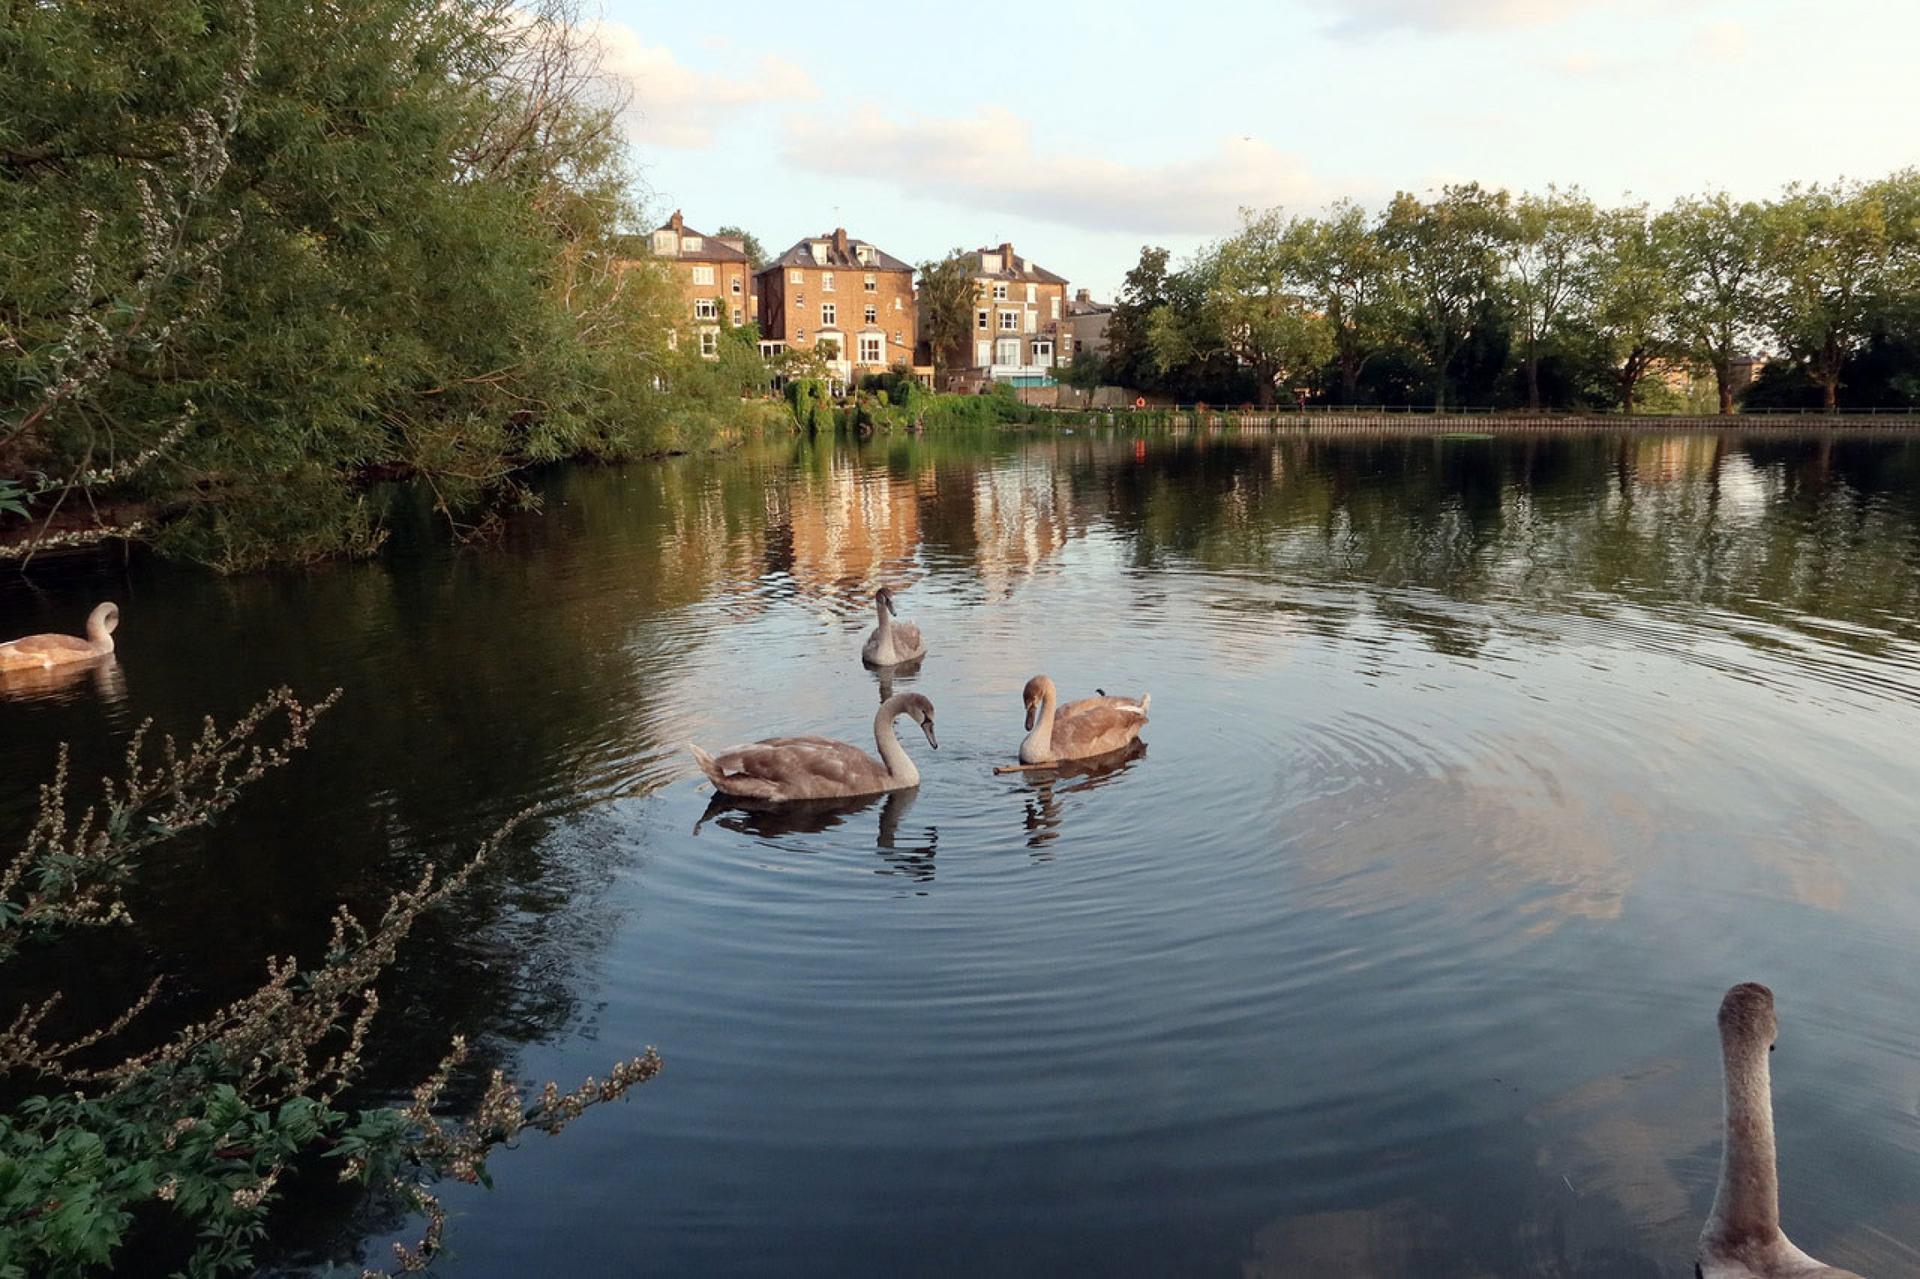 Several swans are shown in a small body of water with trees all around and three brick houses in the distance.